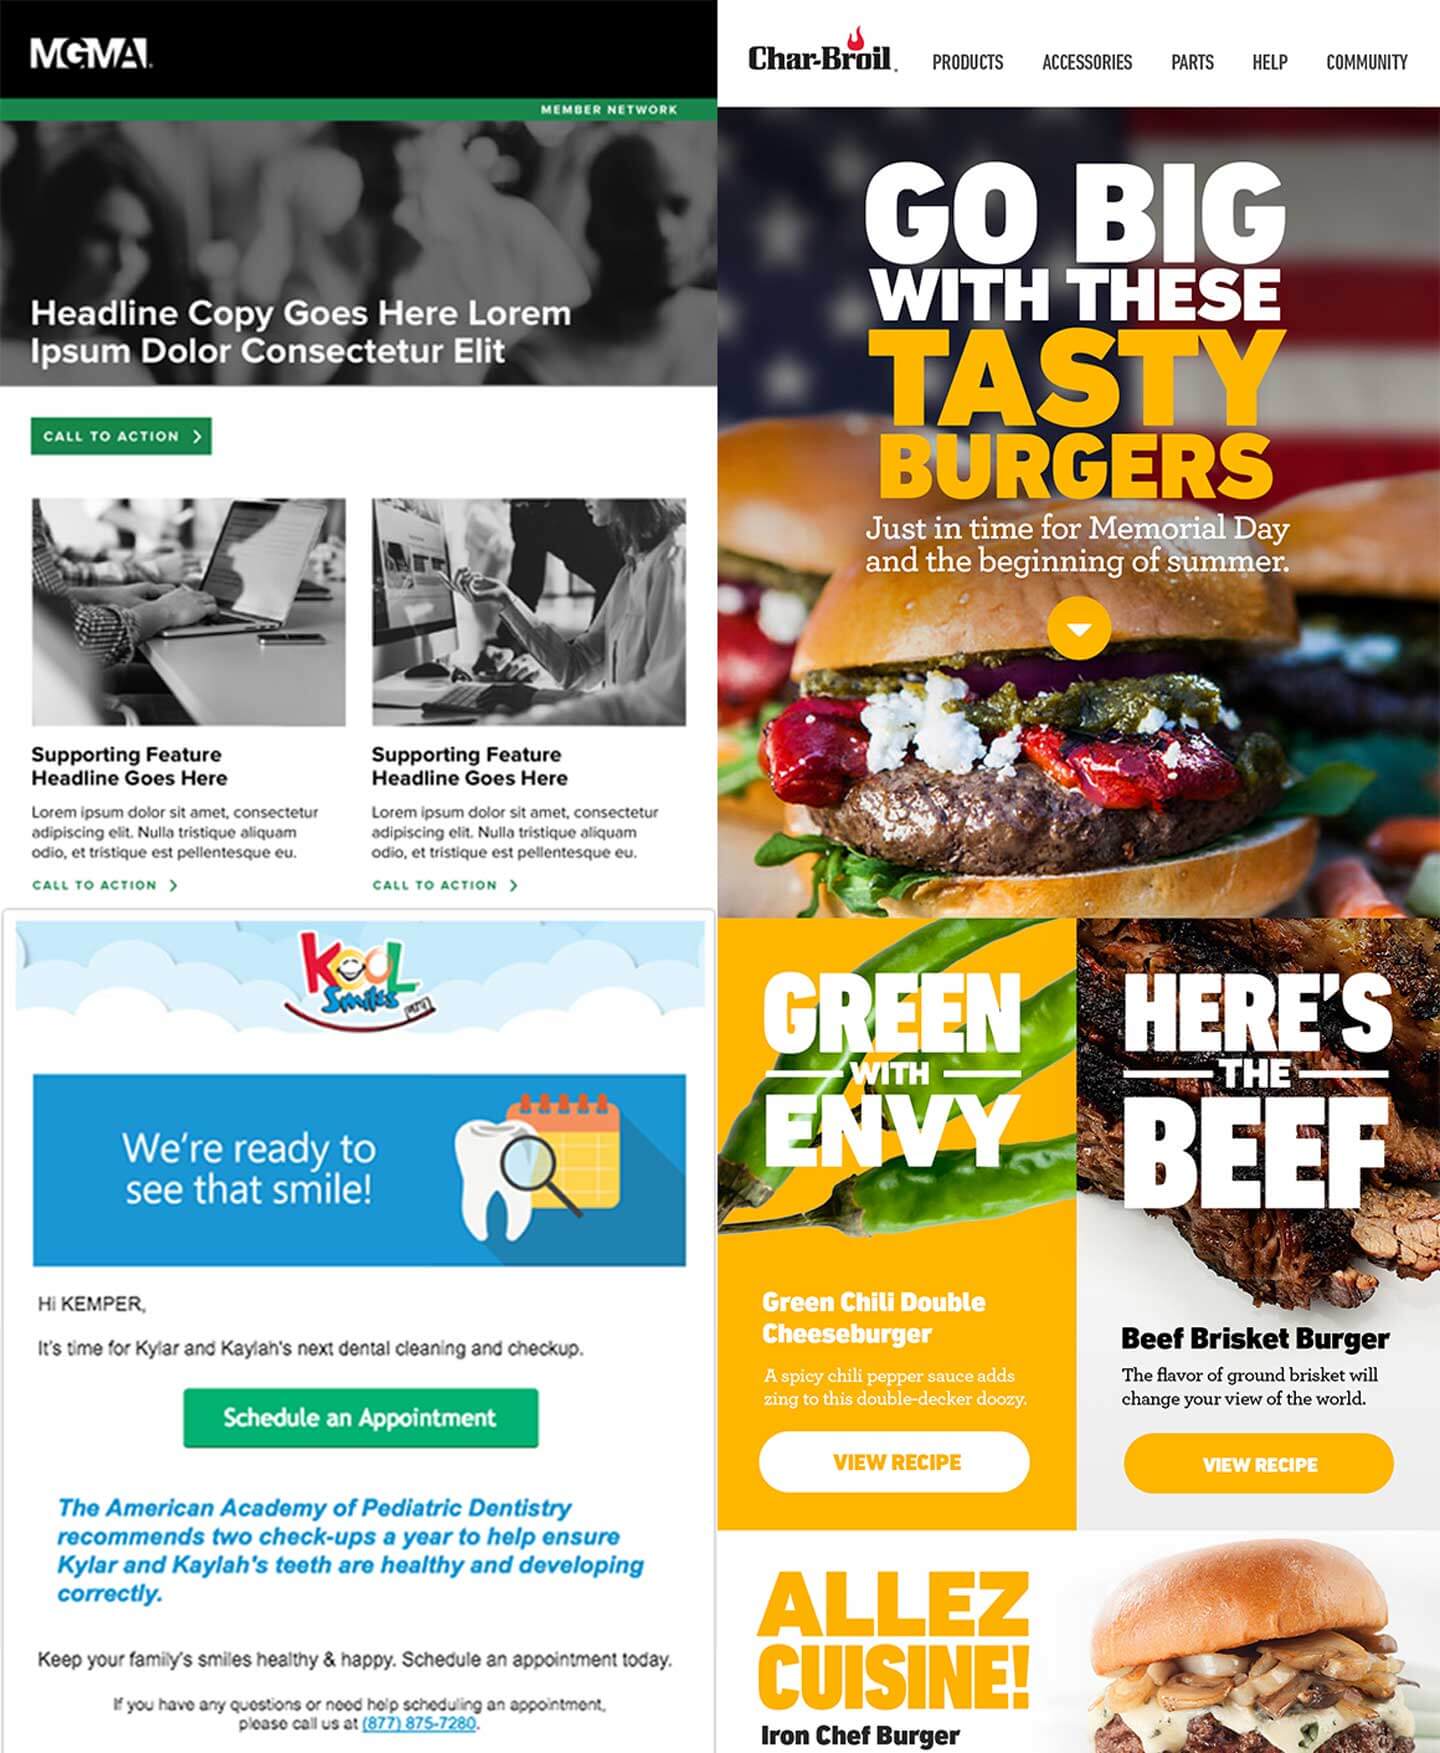 Three images consisting of MGM, Char-Broil, and Koolsmiles company home website